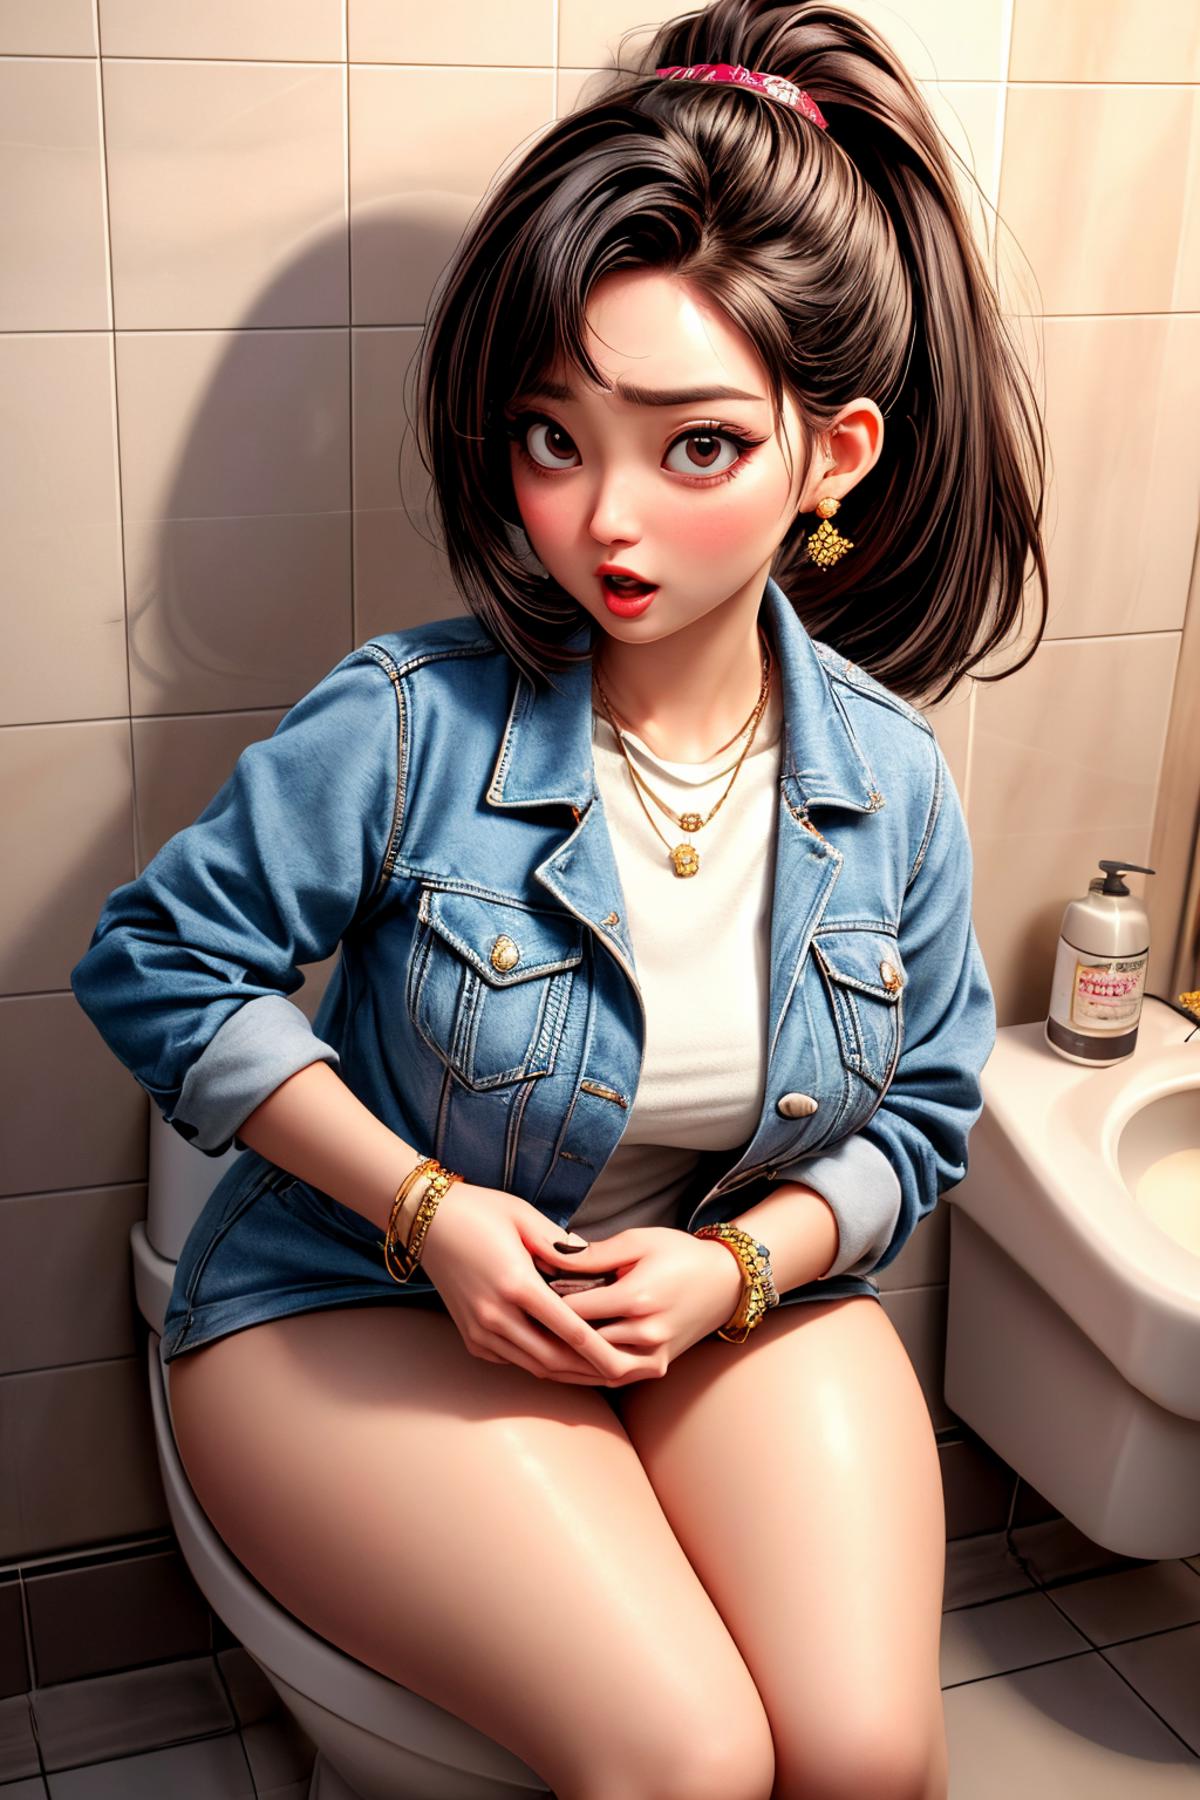 Caught Peeing - Embarrassed women caught on the toilet image by girlspeevr